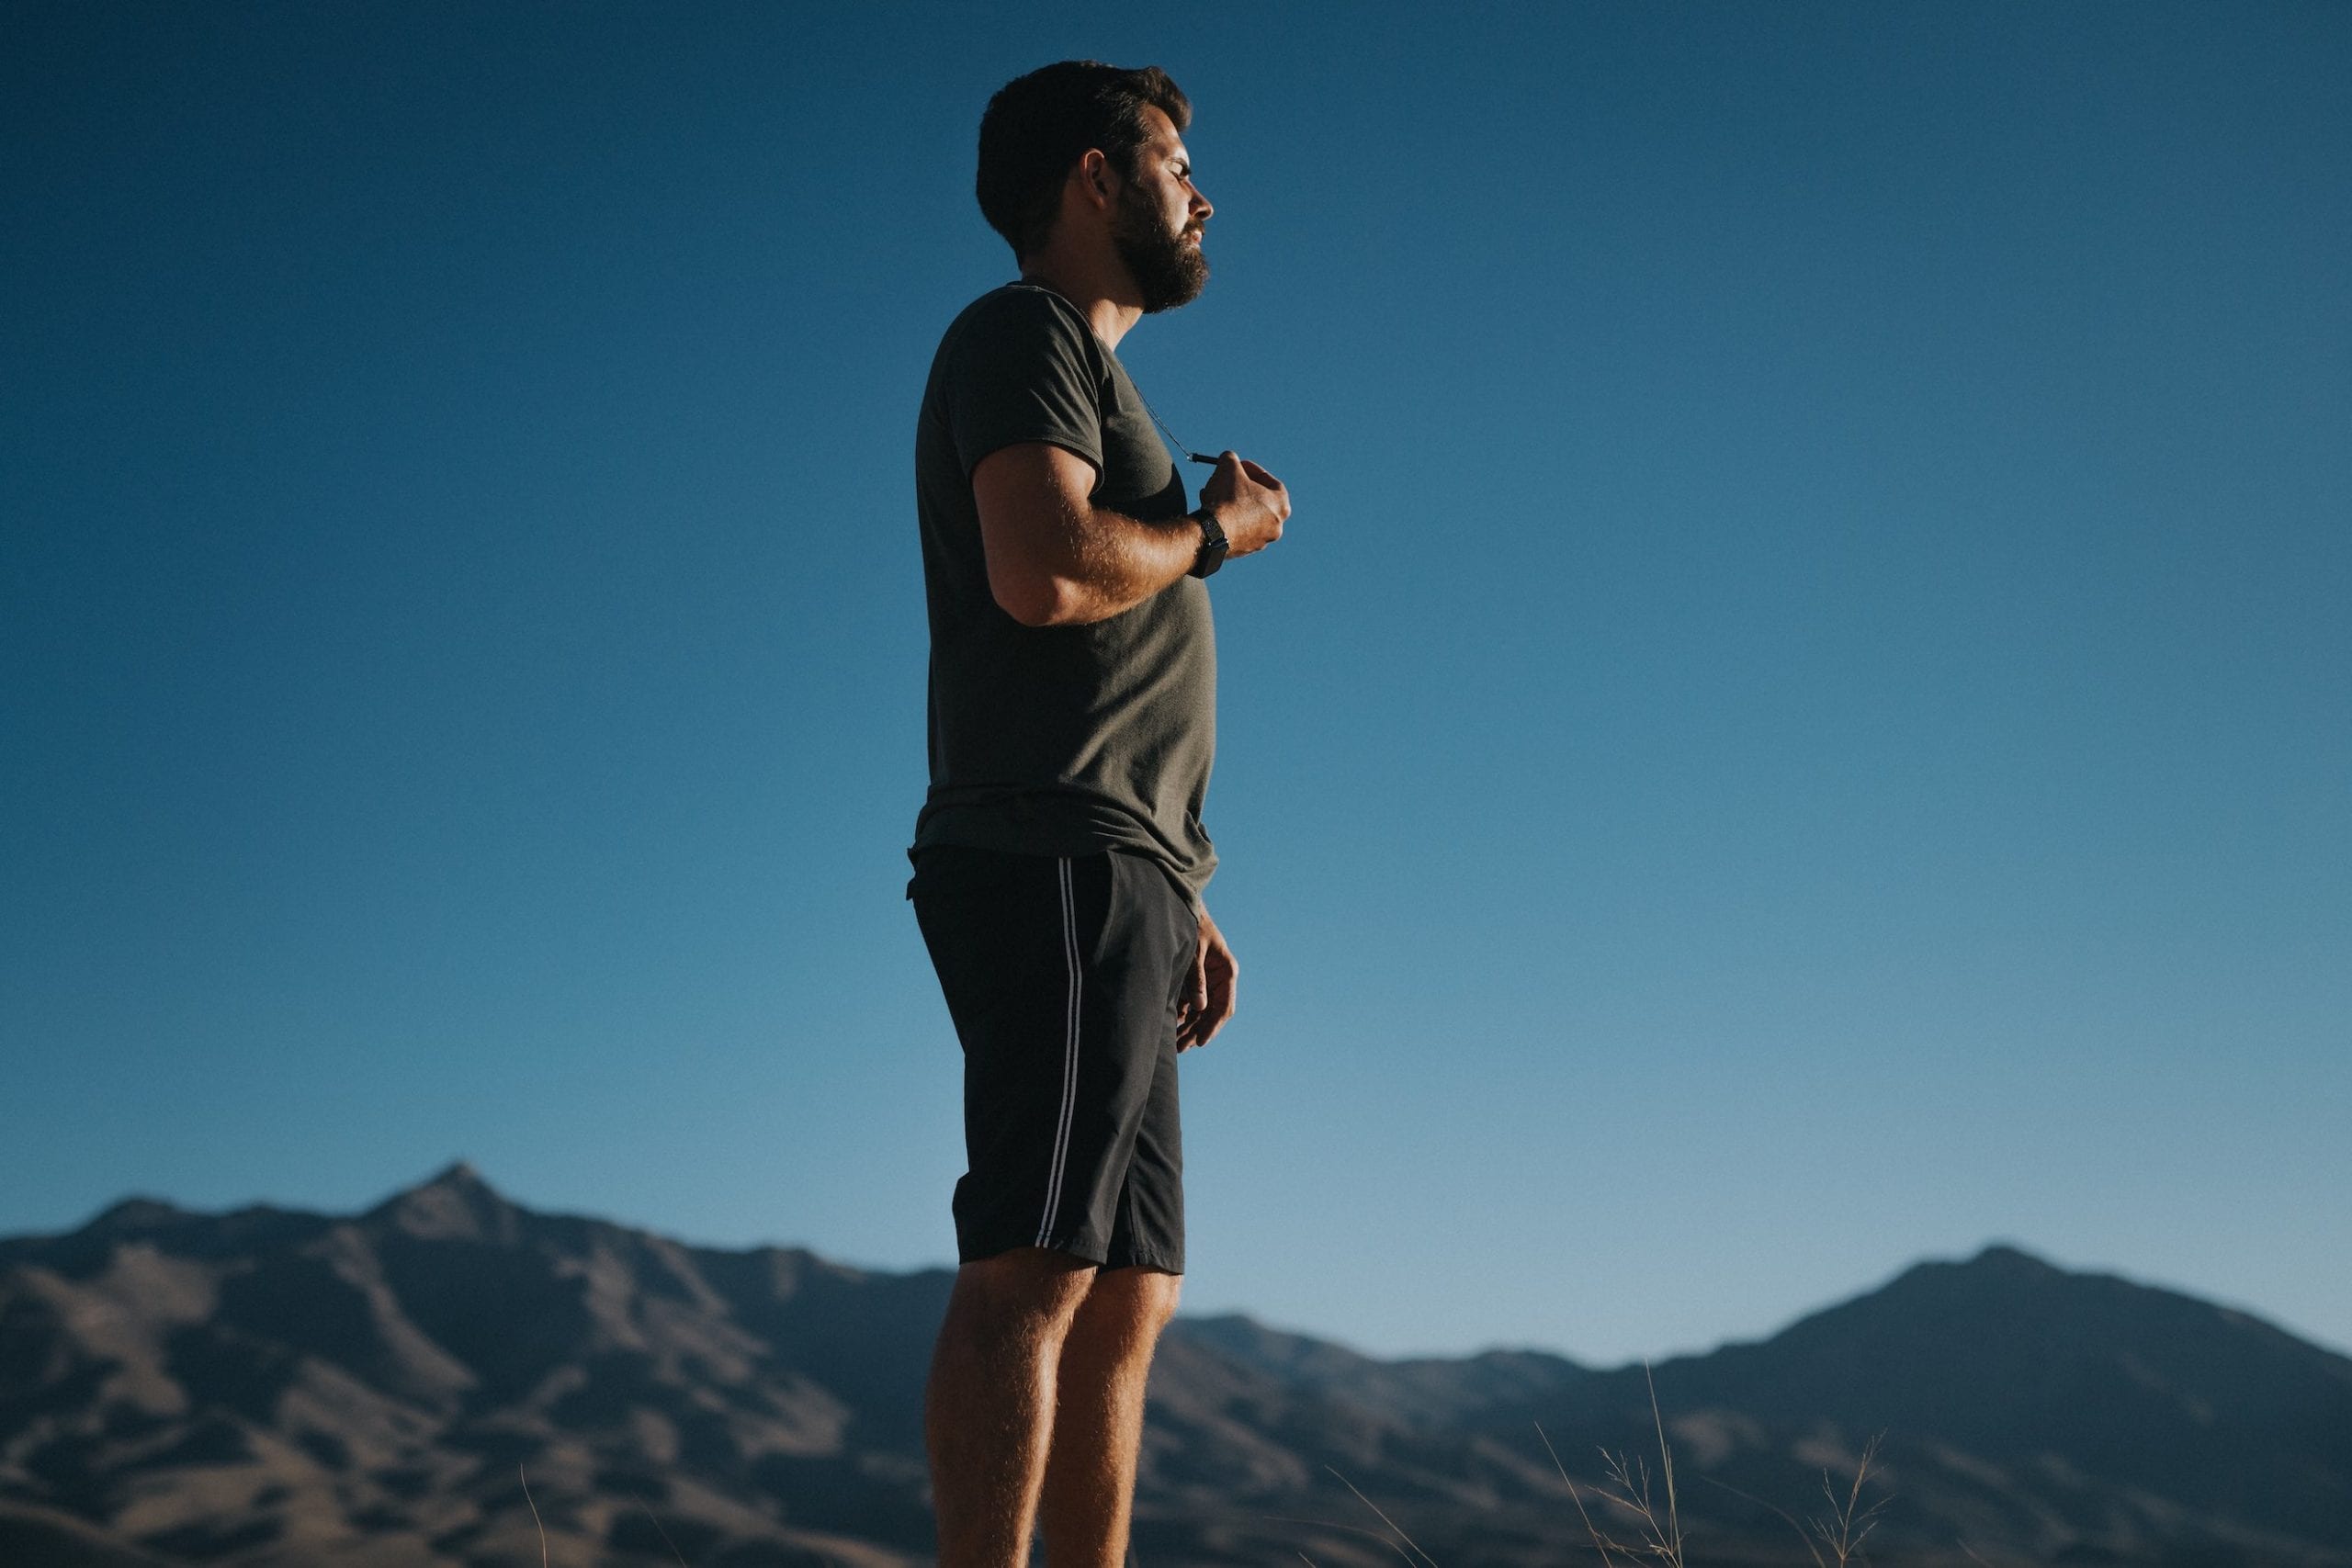 Side profile of a man with short hair and beard wearing a gray t shirt and black shorts posing for the camera with eyes closed with hills in the background